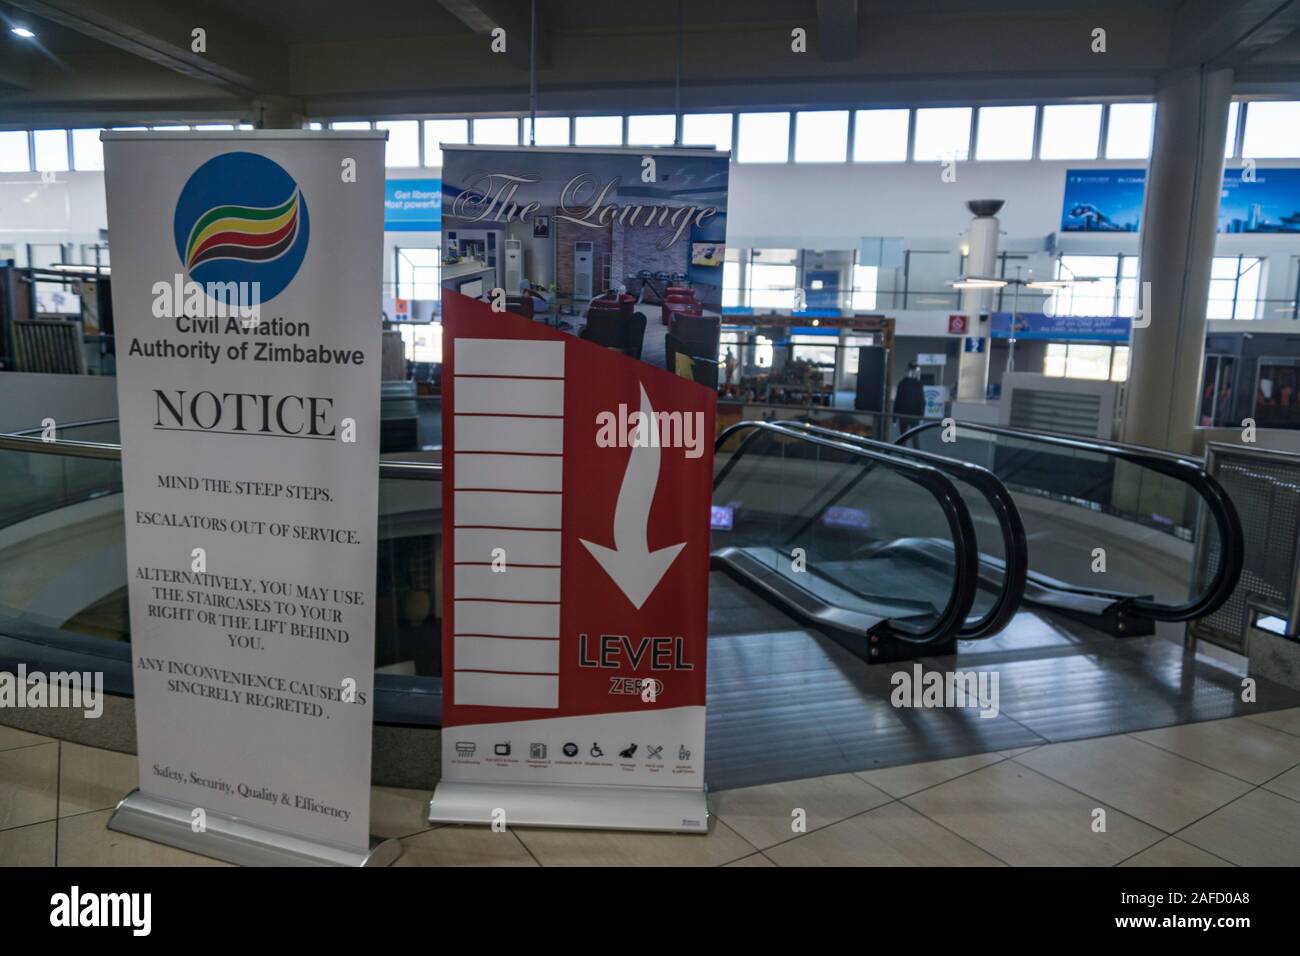 Harare, Zimbabwe. A notice in the Robert Gabriel Mugabe international airport, to note that the escalator is out of order. As of 2019, the country was in a financial crisis and even places as the airport are in decay and suffer from lack of funds. Stock Photo